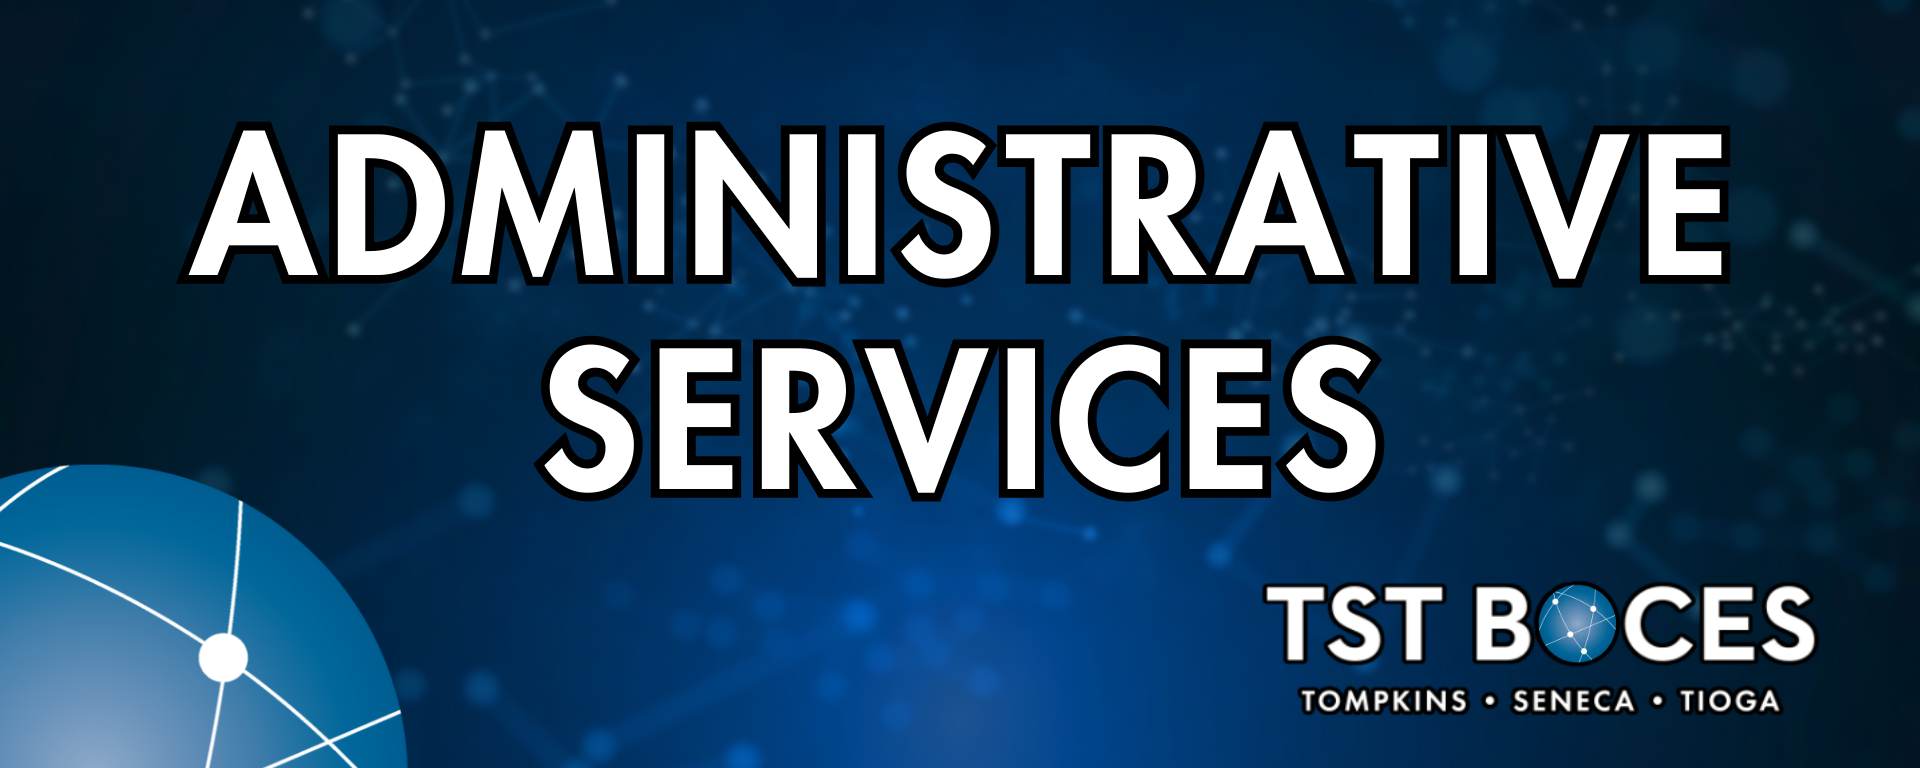 Administrative Services Banner